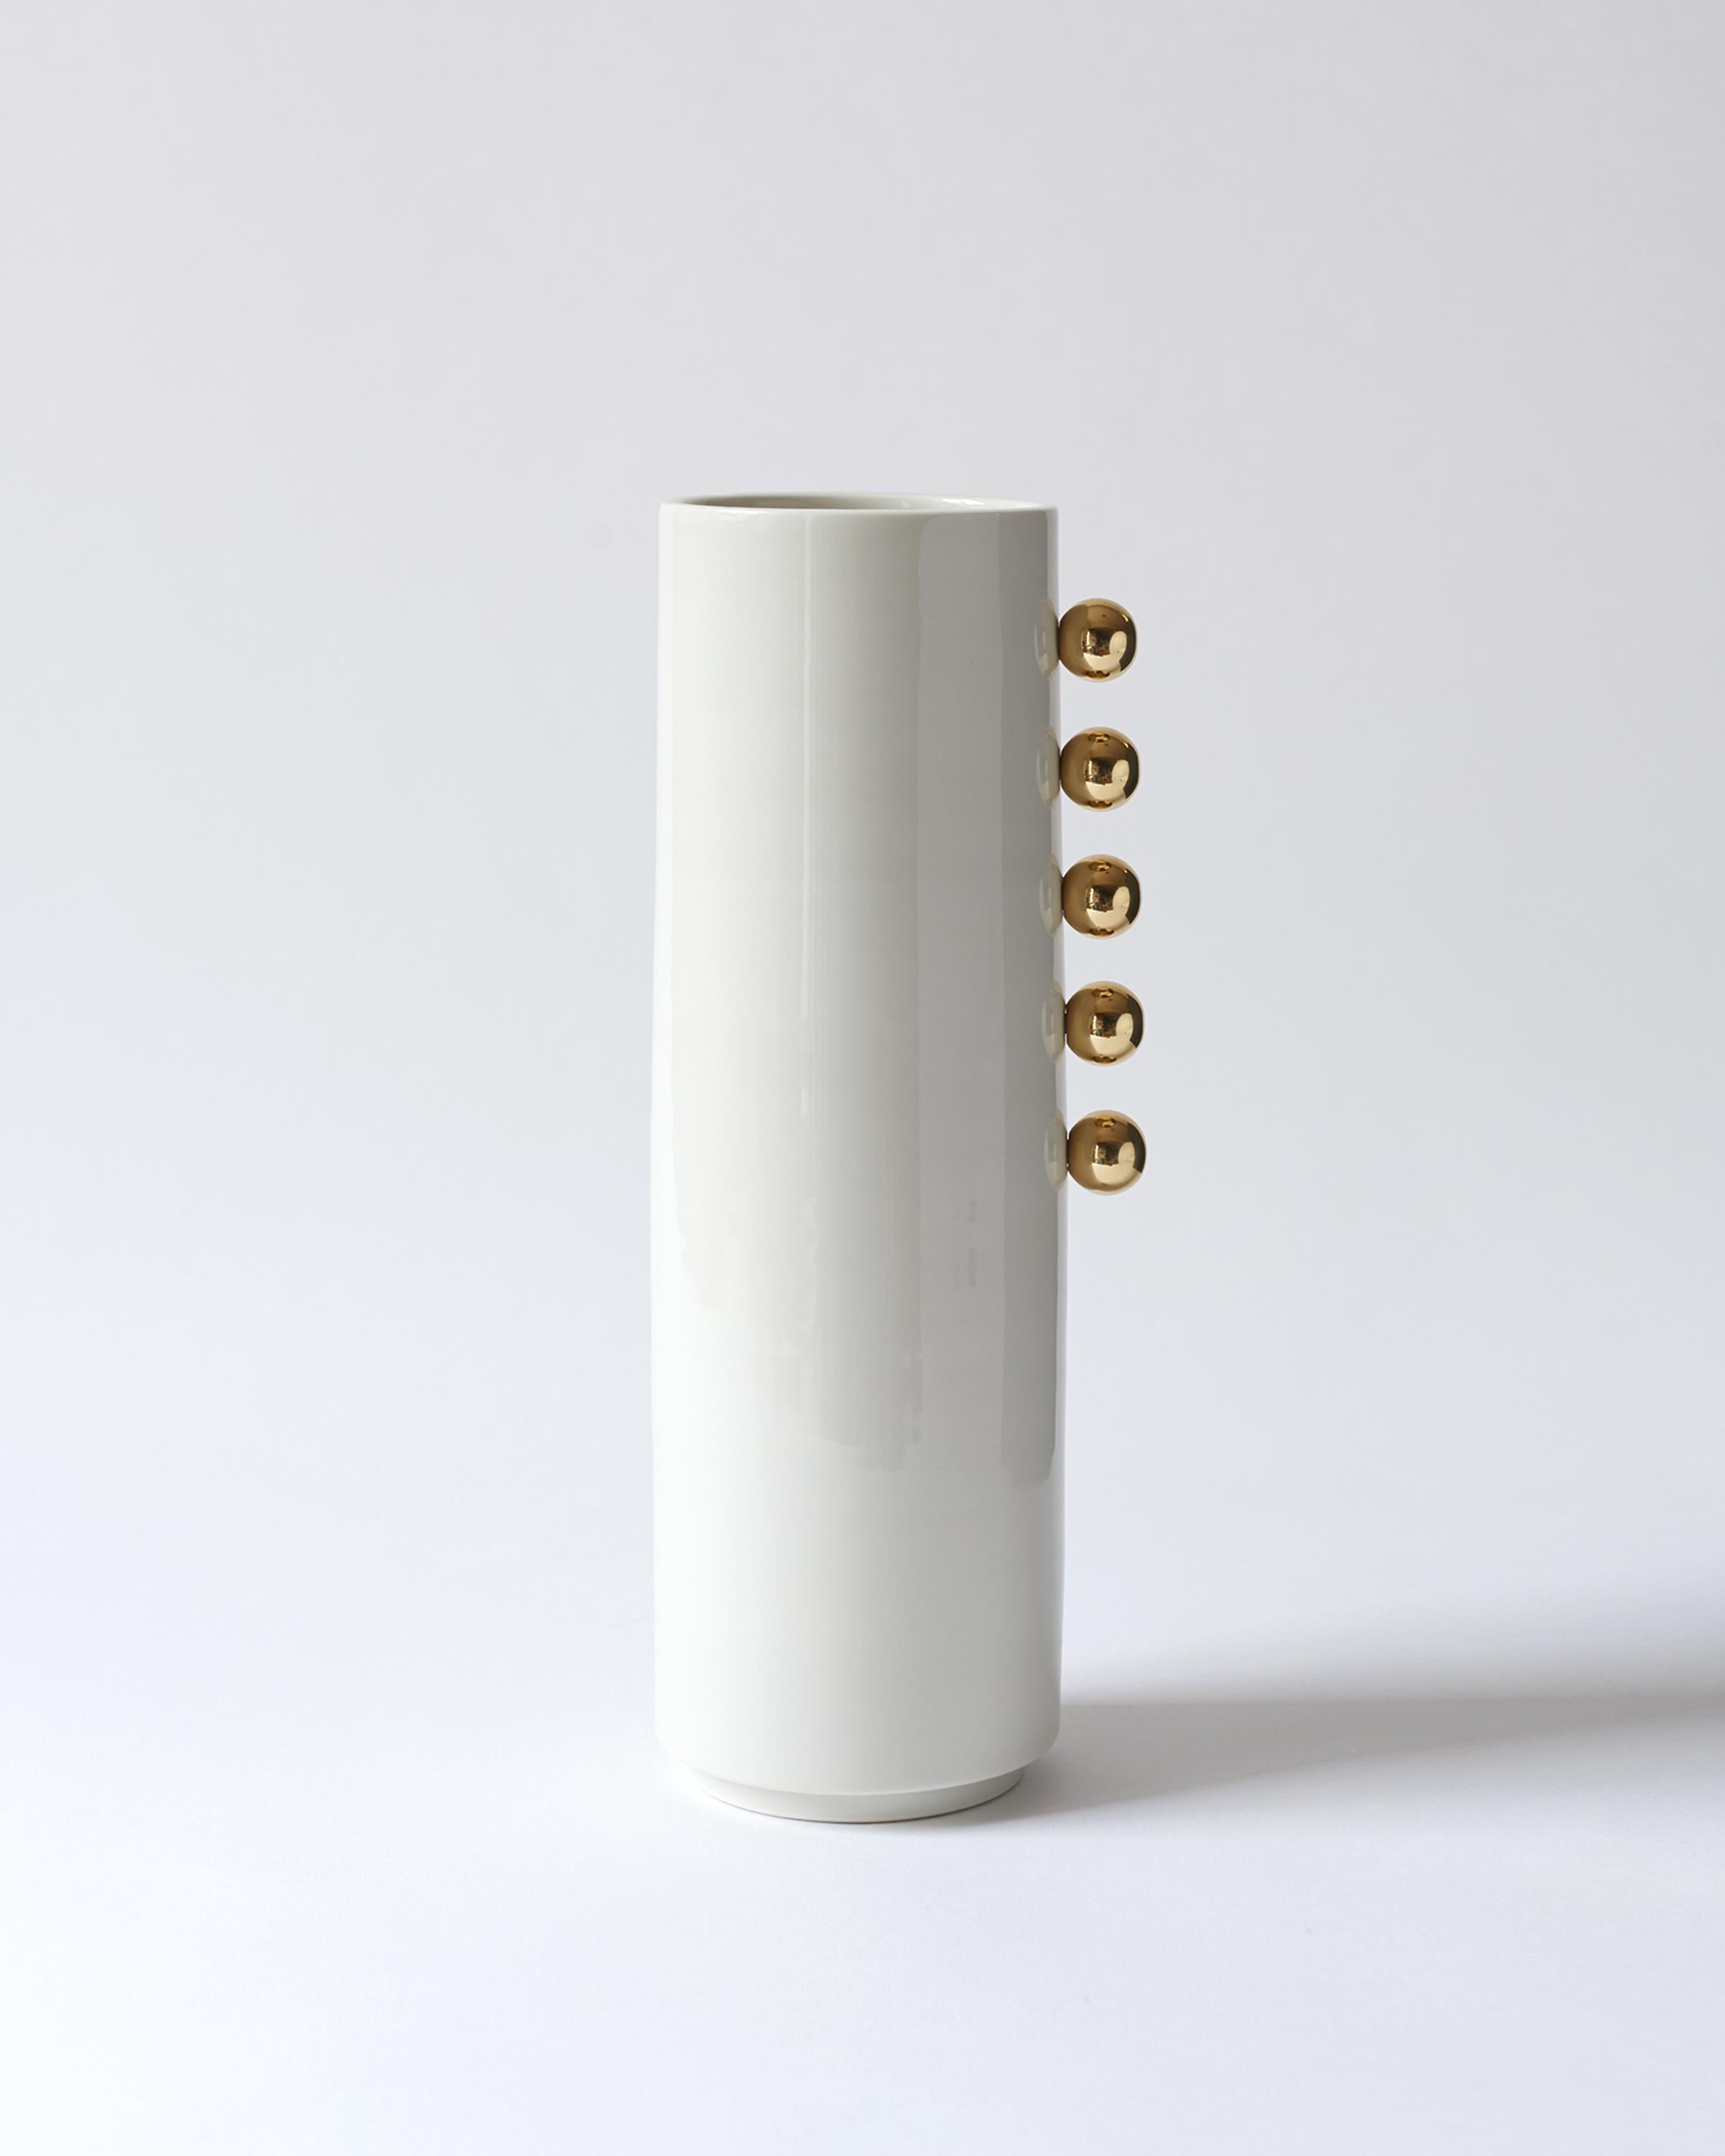 This hand-thrown porcelain vase is a contemporary stand out piece.
The vase is made of glossy white porcelain with five polished Brass Balls and has a size of diameter of 9.5 cm, height 30 cm. 

The first Atlas Crafts collection is thrown by hand